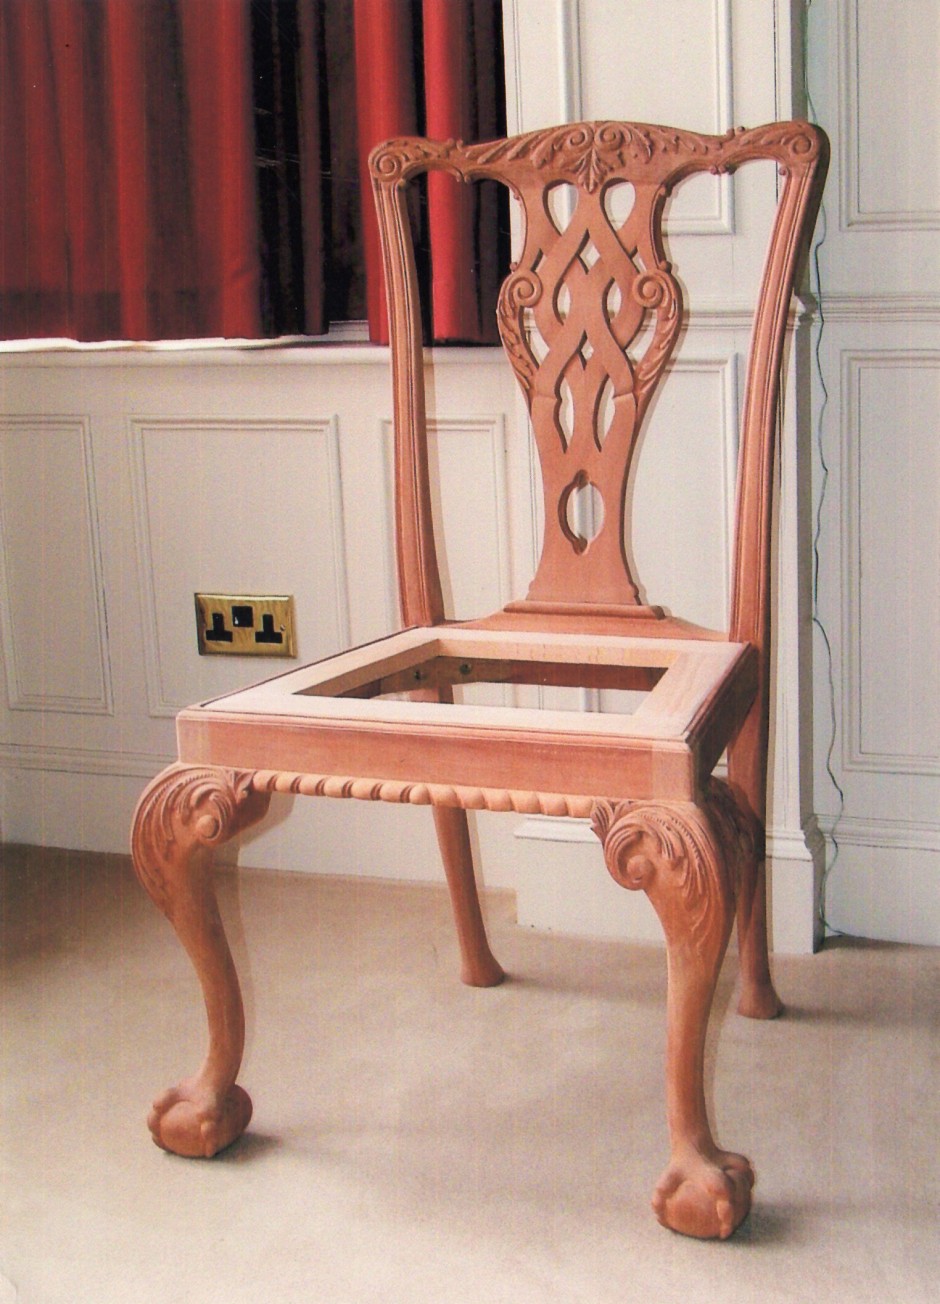 Chippendale Style Chair By Carved By Jose Sarabia - chippendale style chair brazilian mahogany